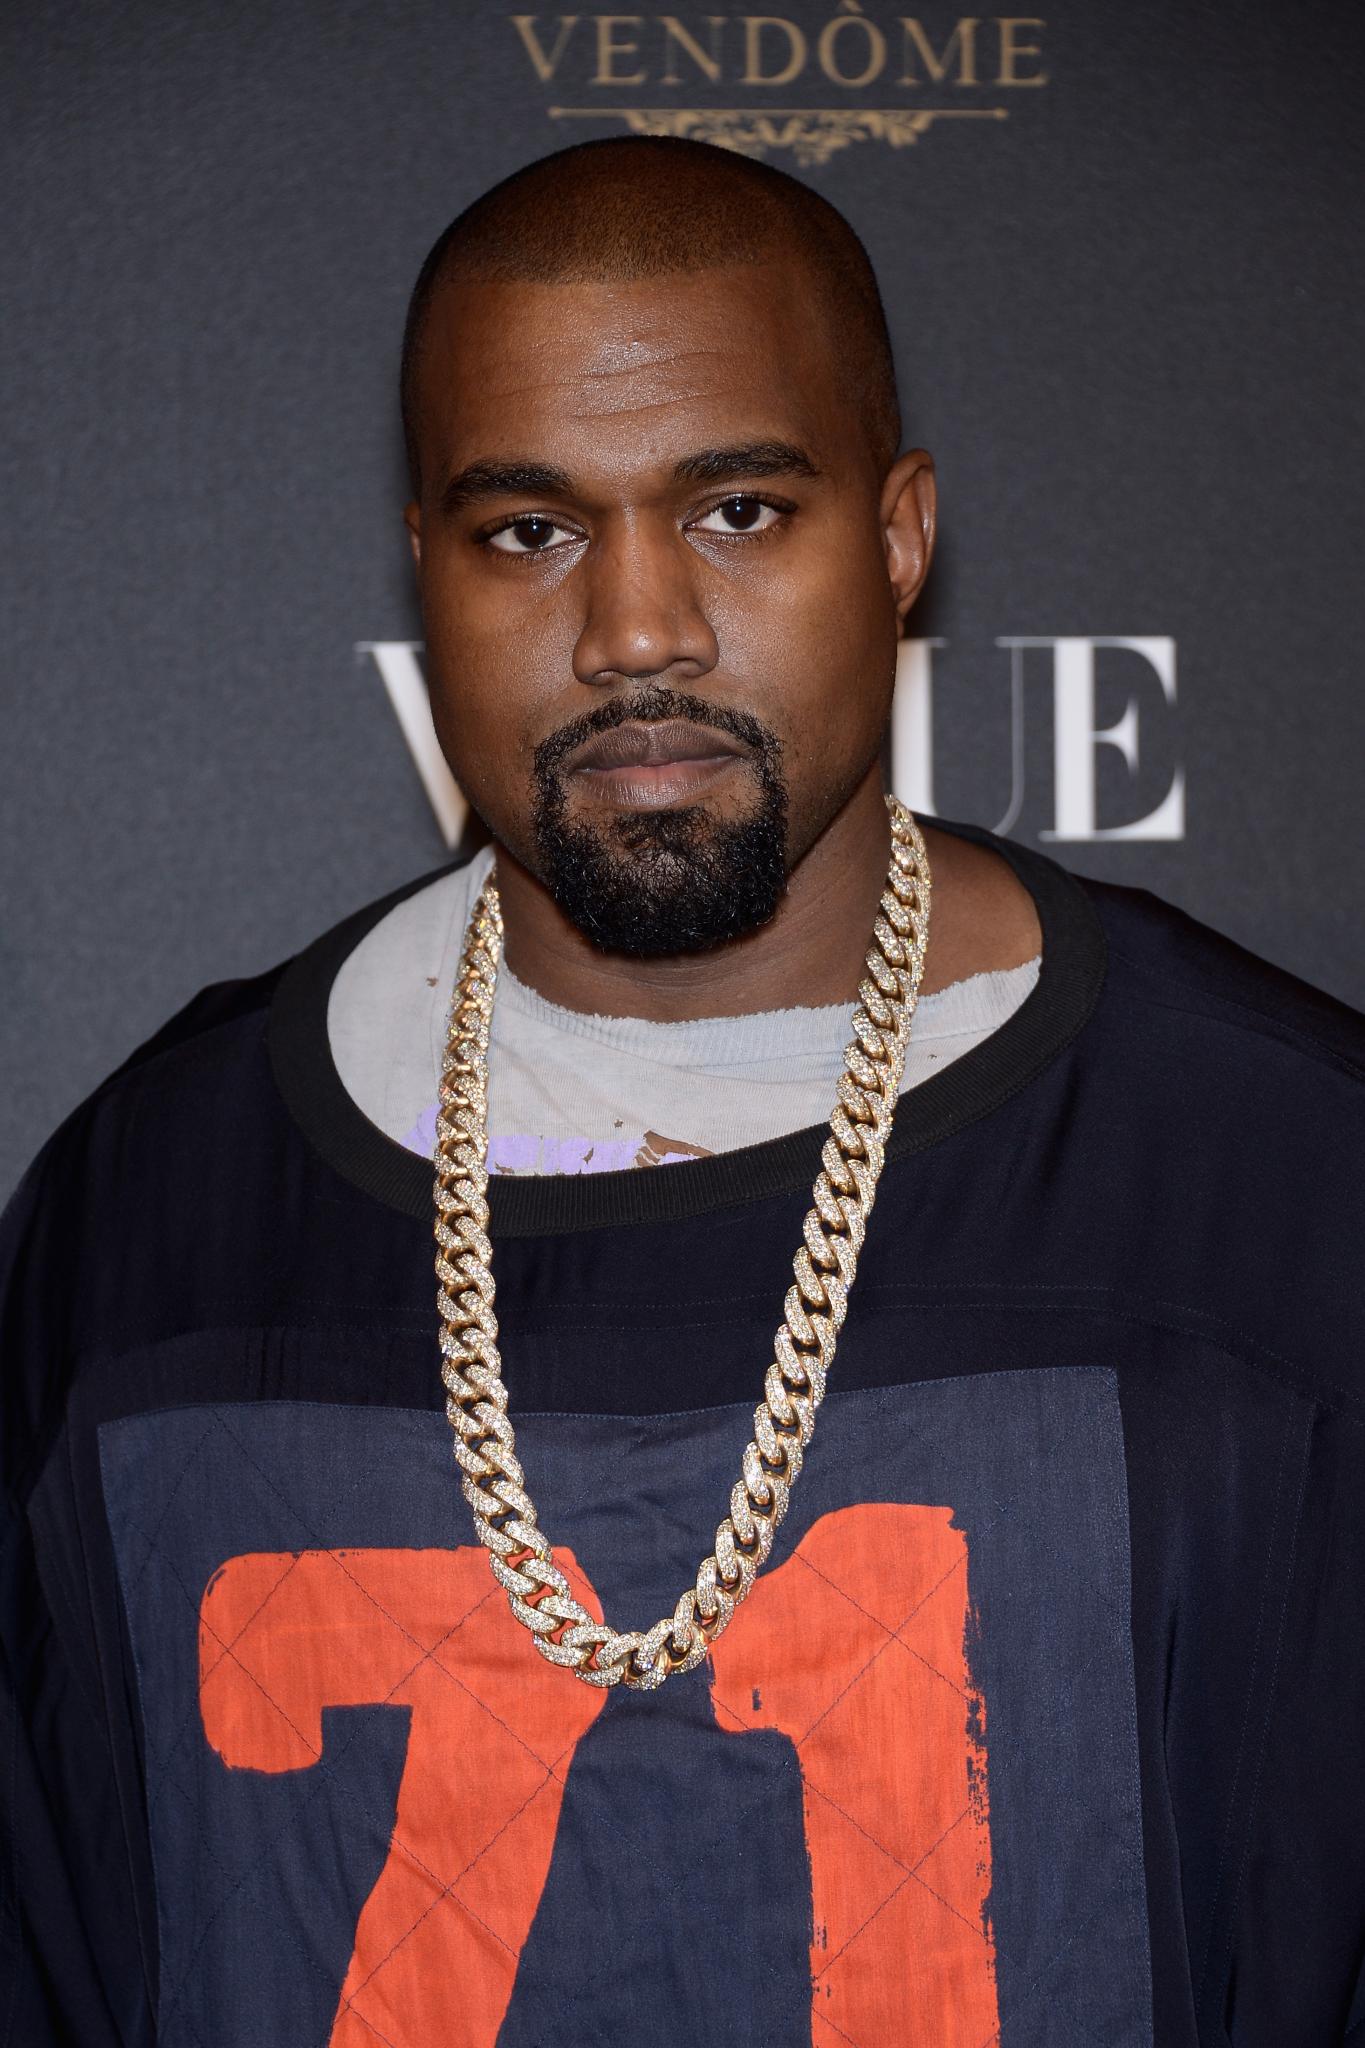 Kanye Apologizes Again For Comments About Amber Rose And Wiz Khalifa’s Son